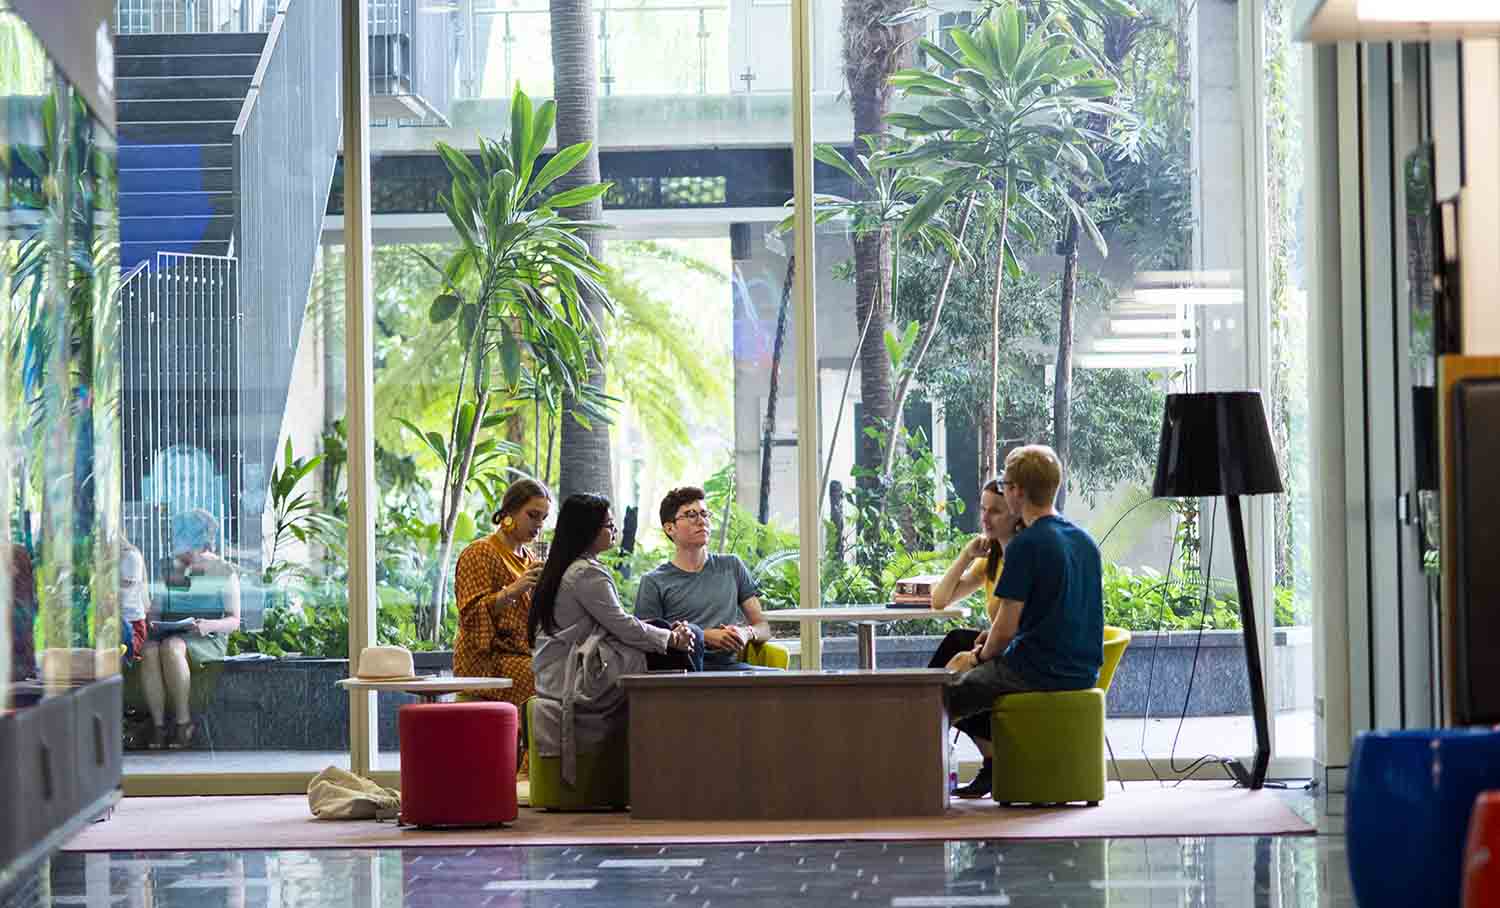 A group of laughing students sit in lounge chairs in a breakout space of a bright foyer filled with plants.